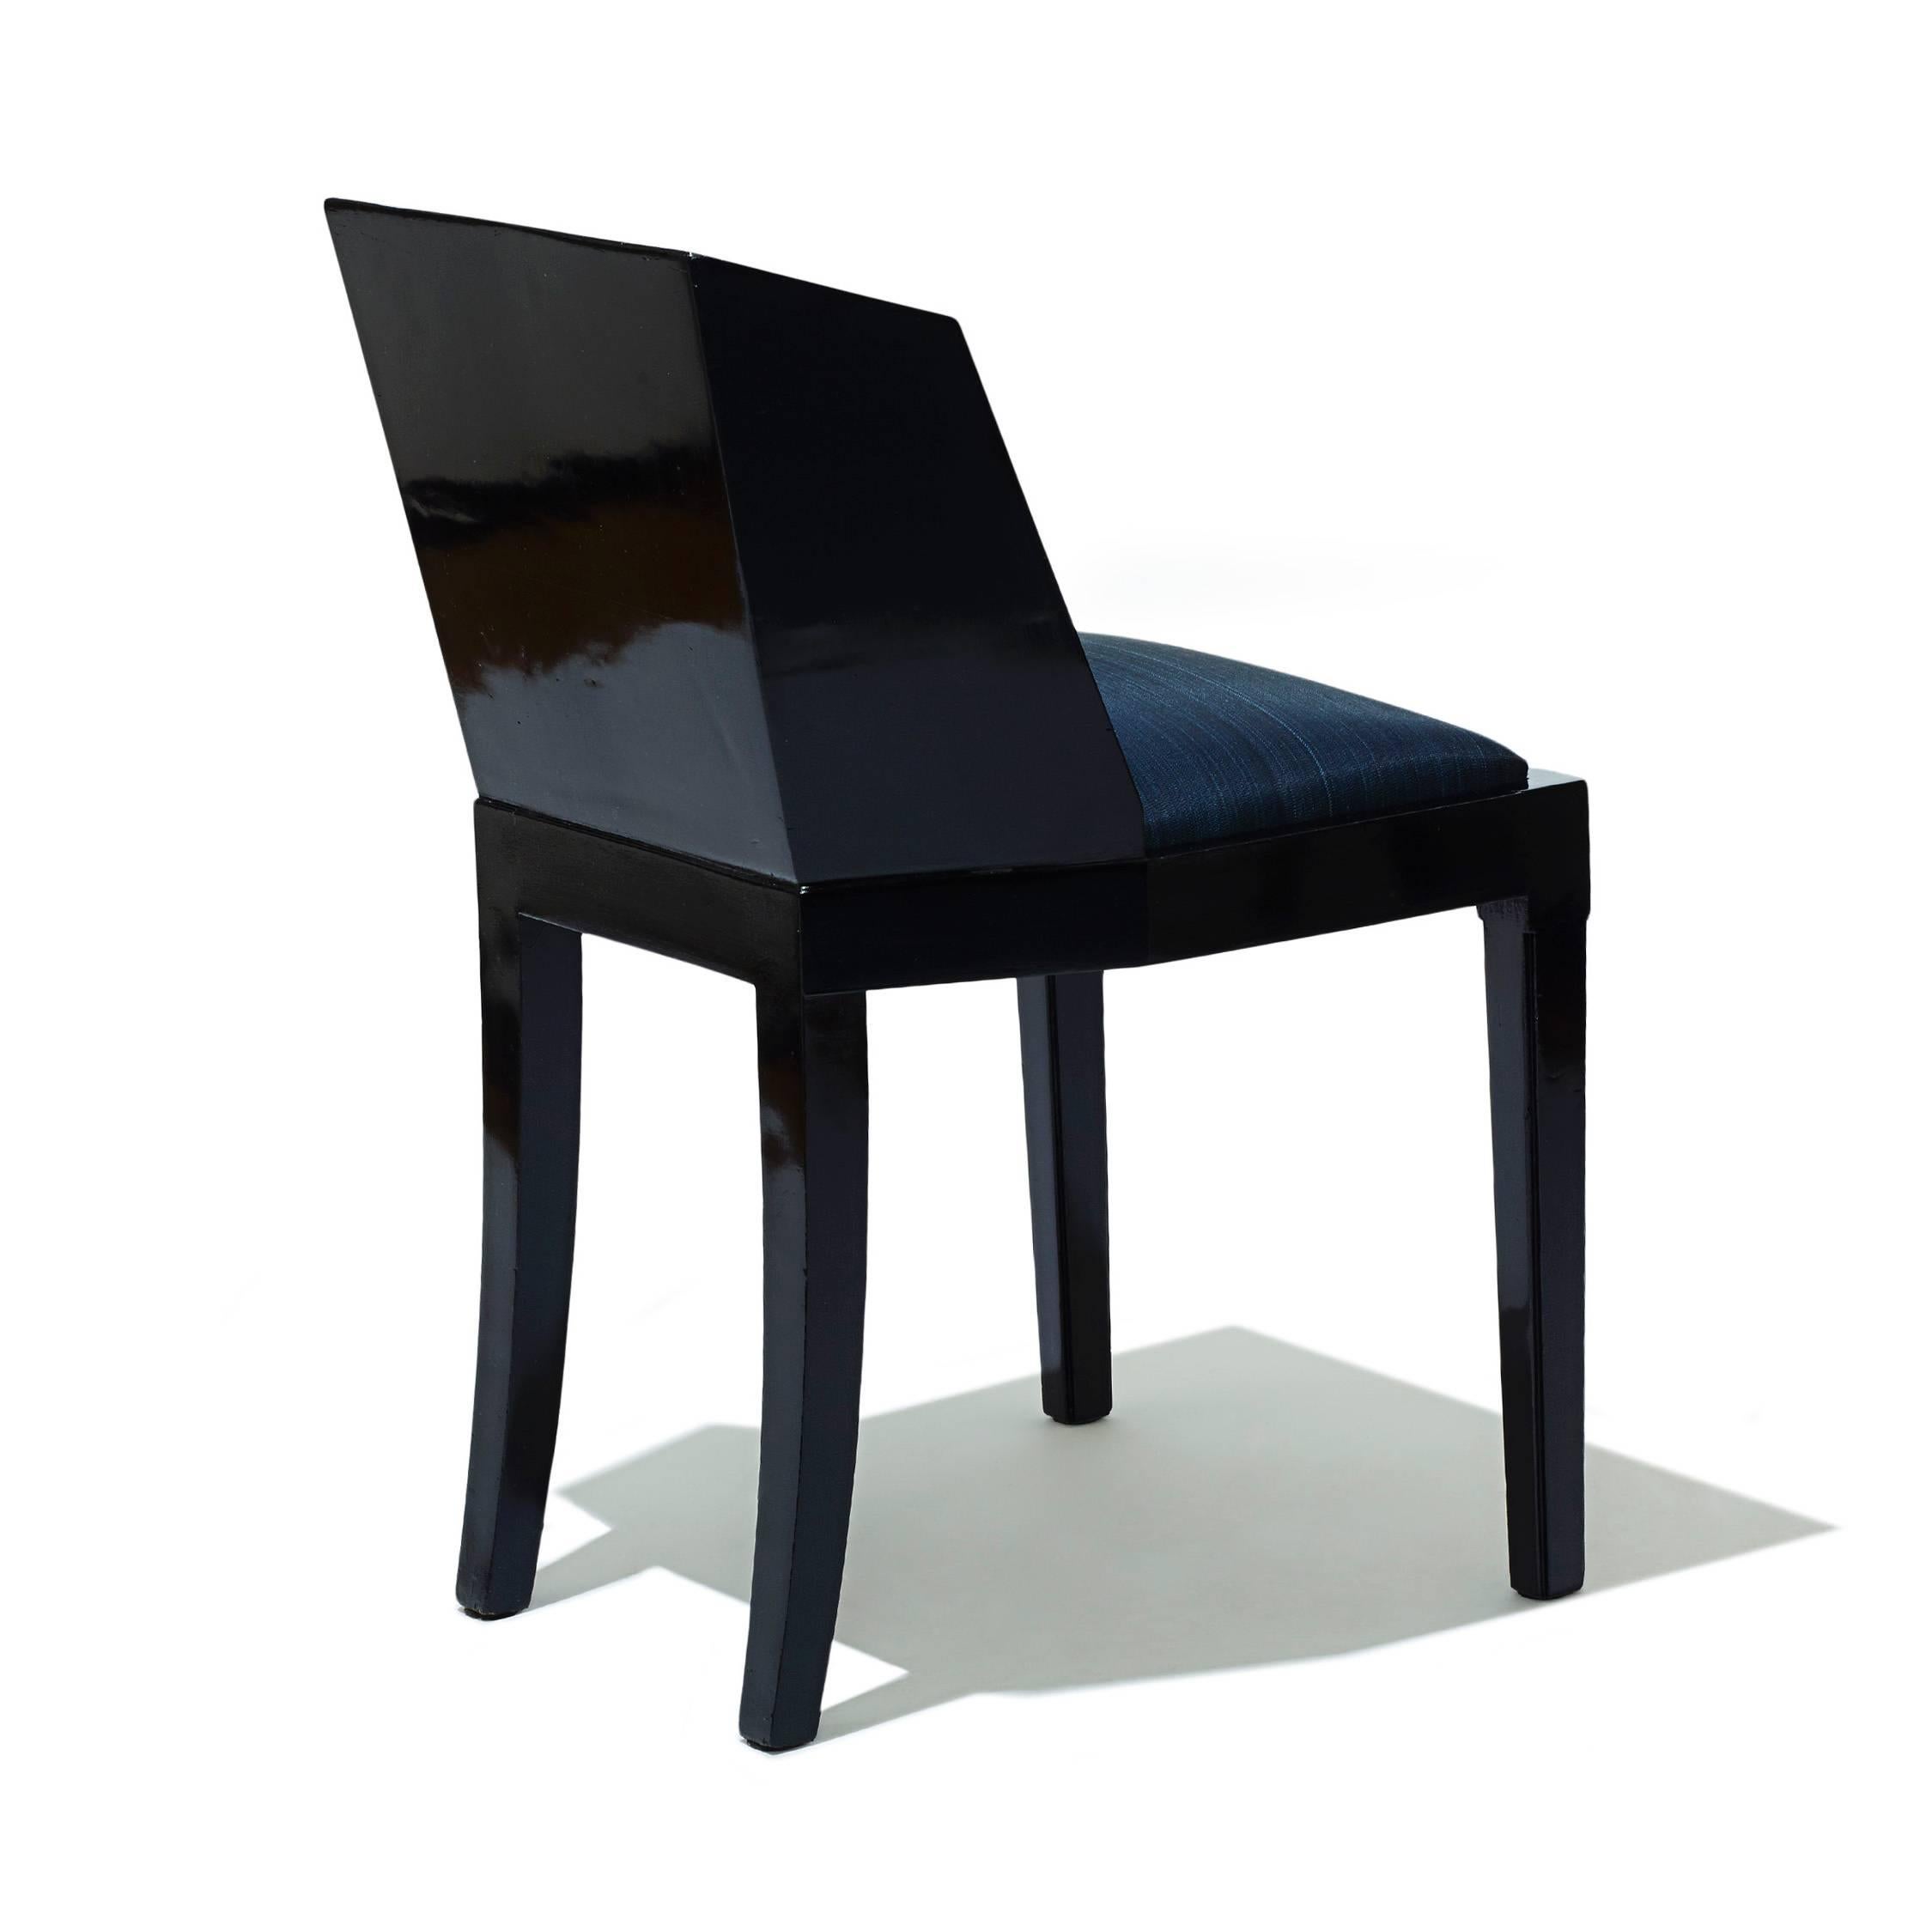 Chair with faceted back by Jean Dunand (1877-1942), in black lacquered wood, reupholstered seat in deep blue horsehair, France, 1920s. Dunand stamp in red on the underside of frame.